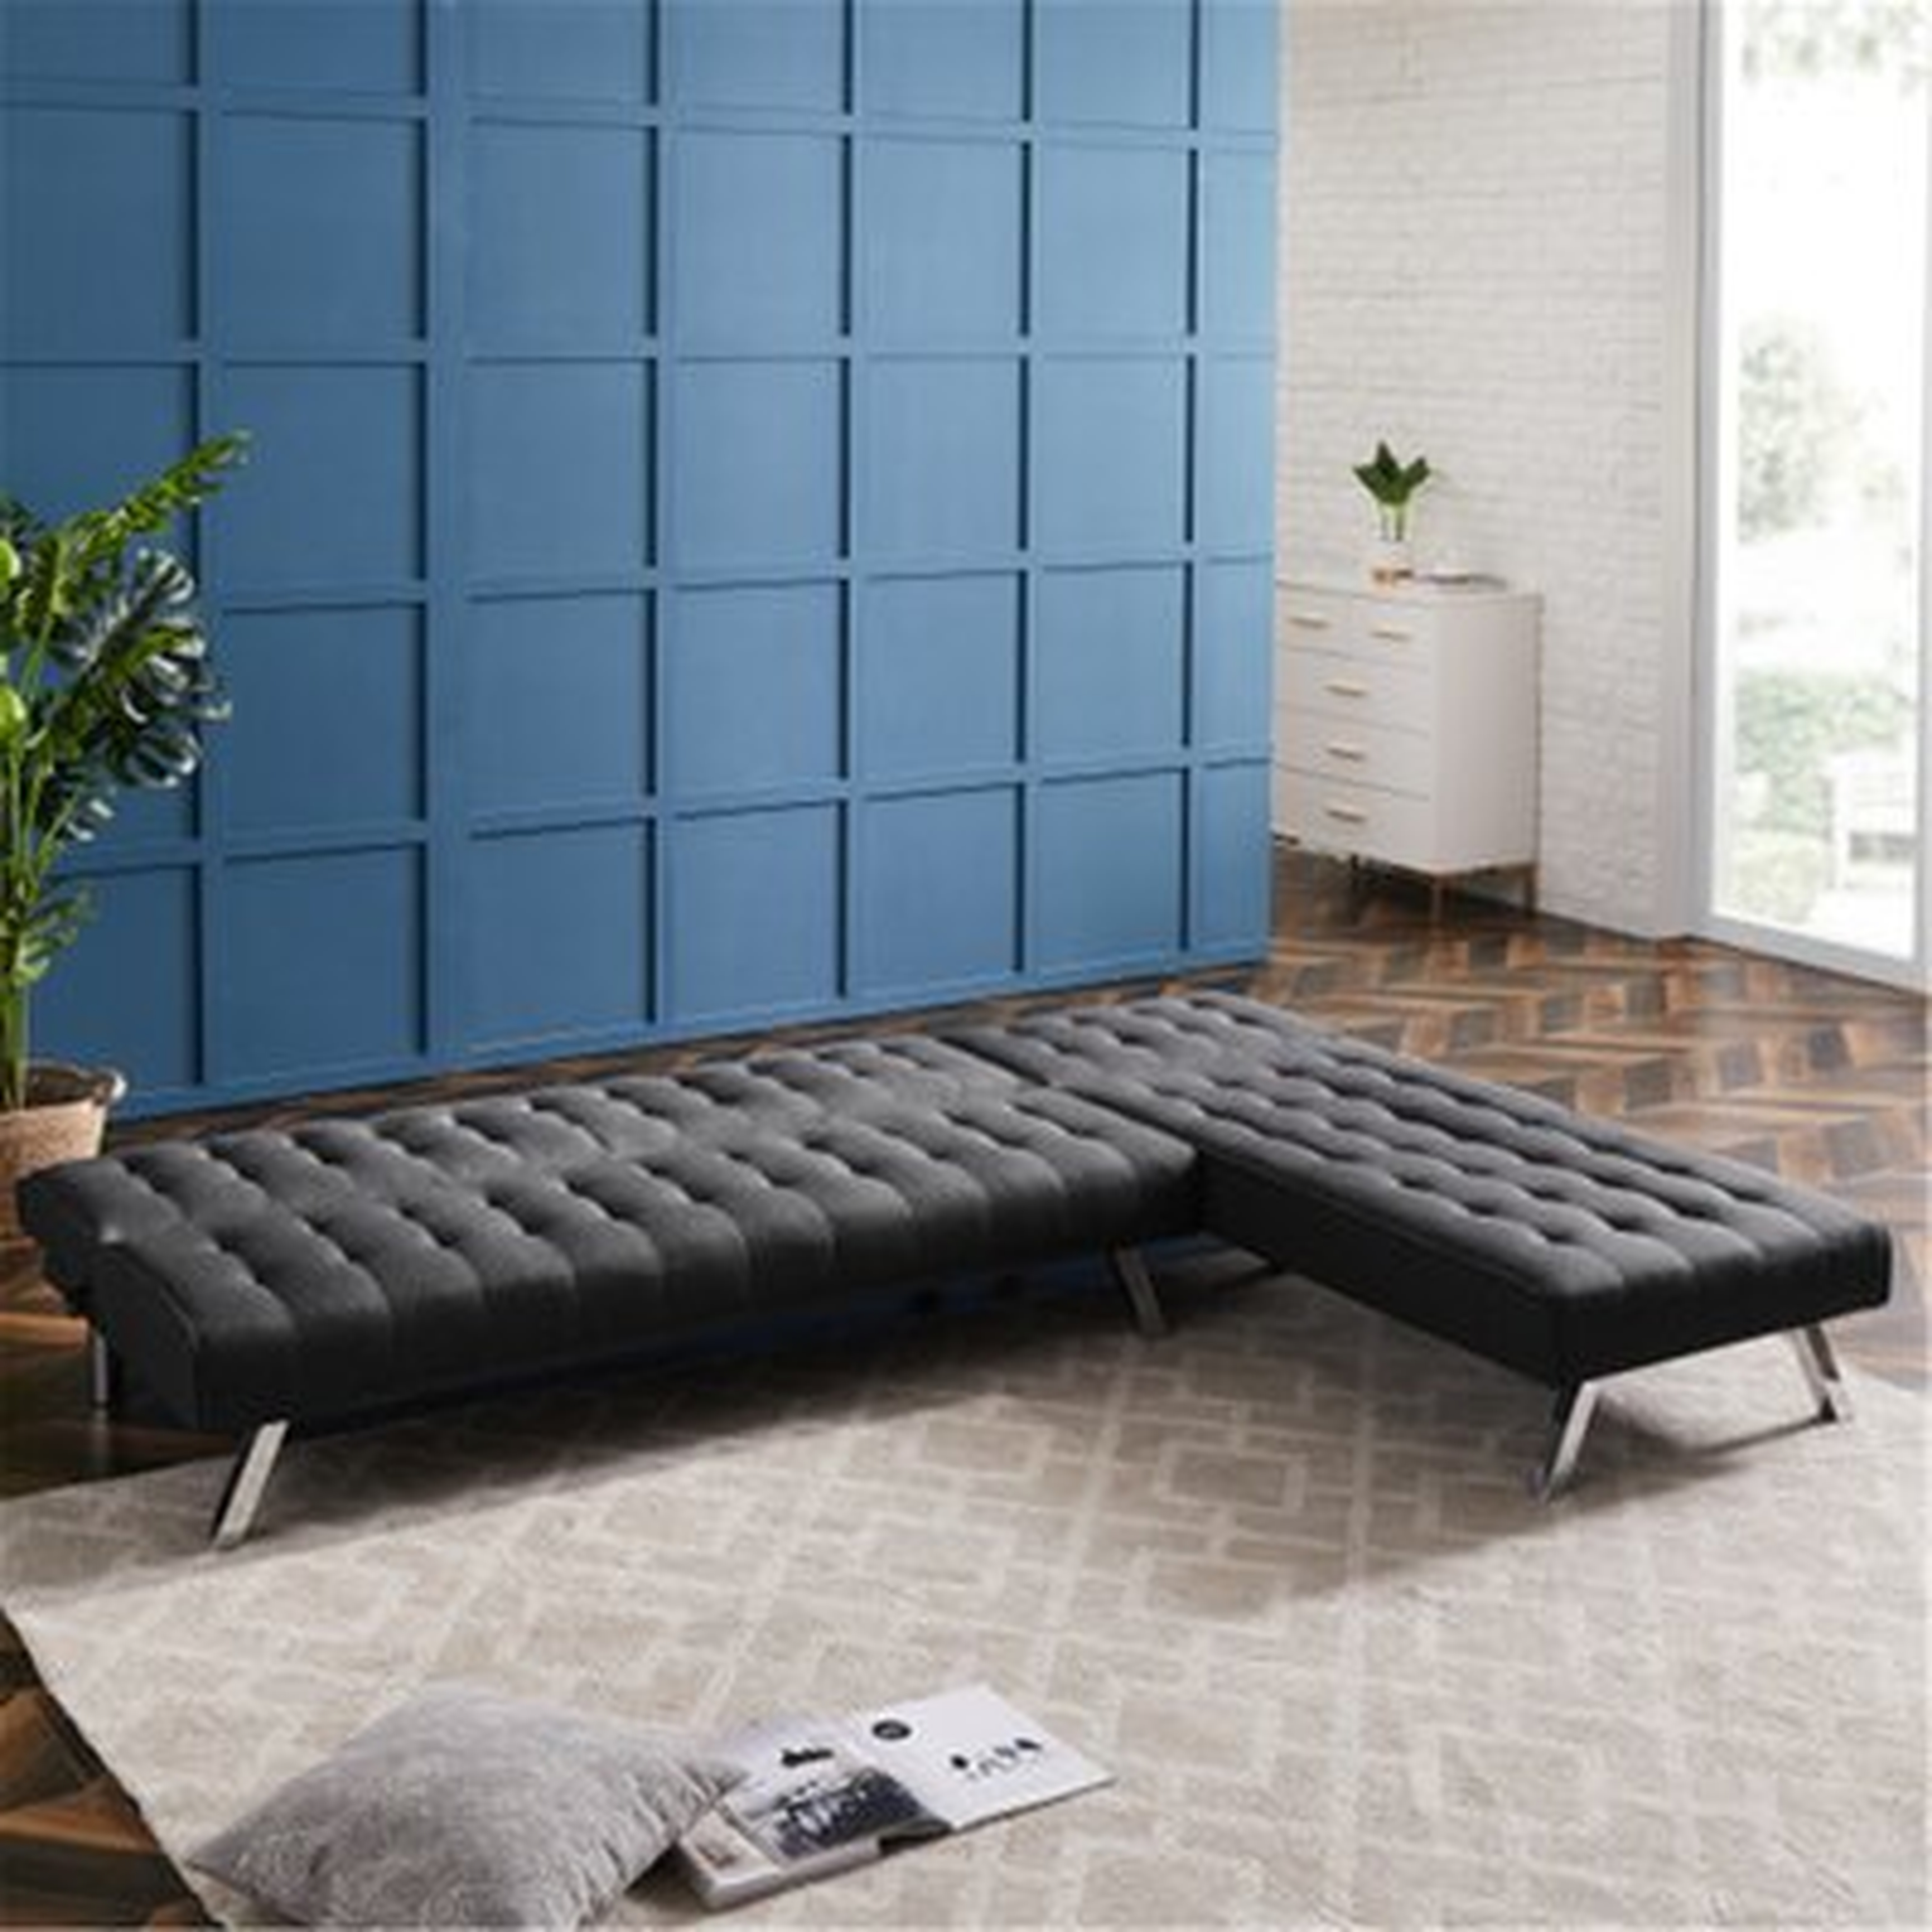 Reversible Sectional Sleeper Chaise Lounger,Convertible Futon Sofa Bed, Fabric And Tufting Detail - Wayfair